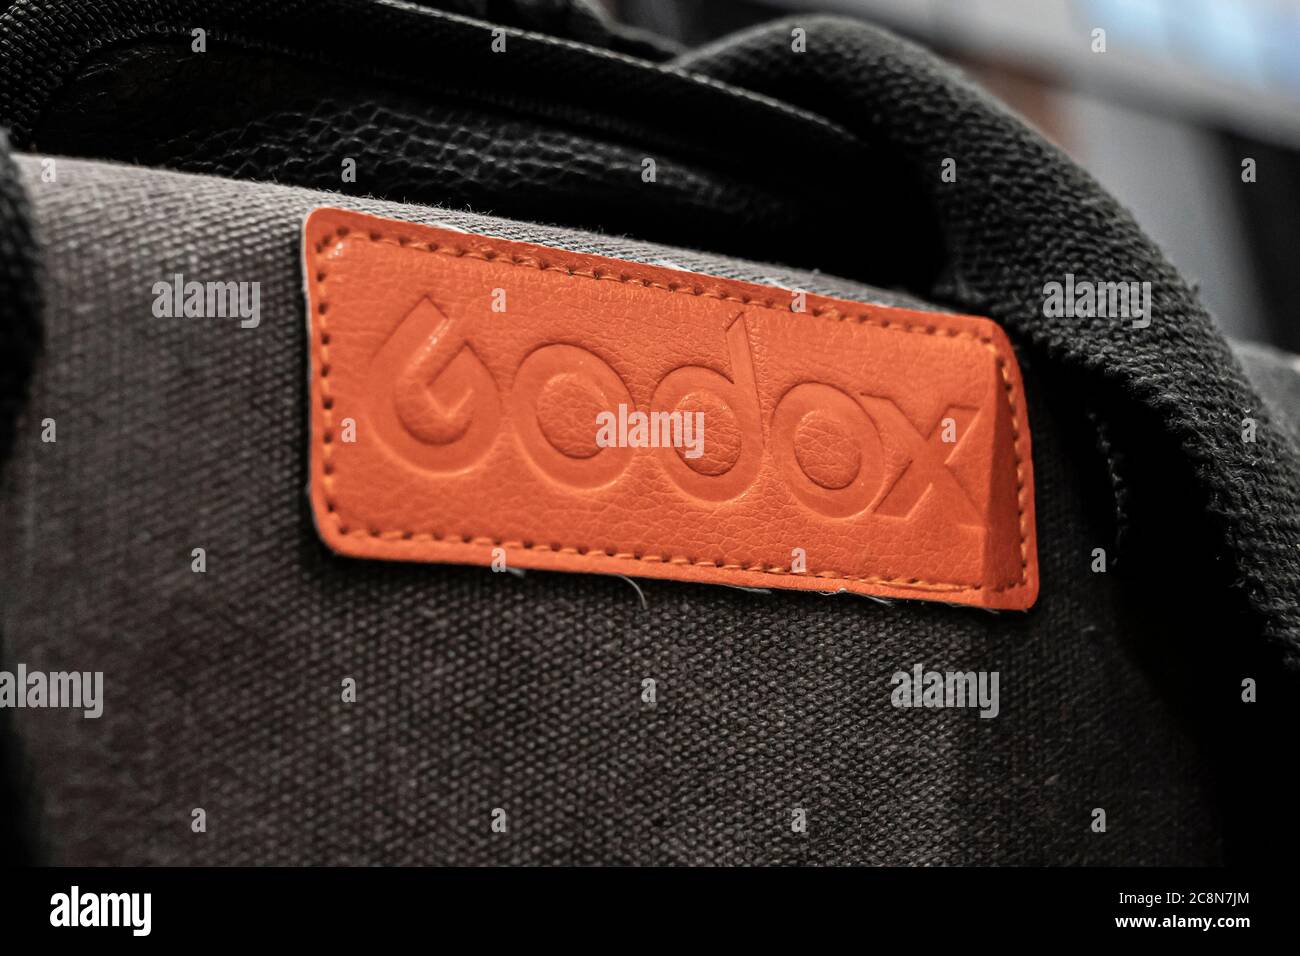 Krasnoyarsk, Russia, June 20, 2020: godox logo on a branded bag with a set of lighting equipment for photography, close-up Stock Photo